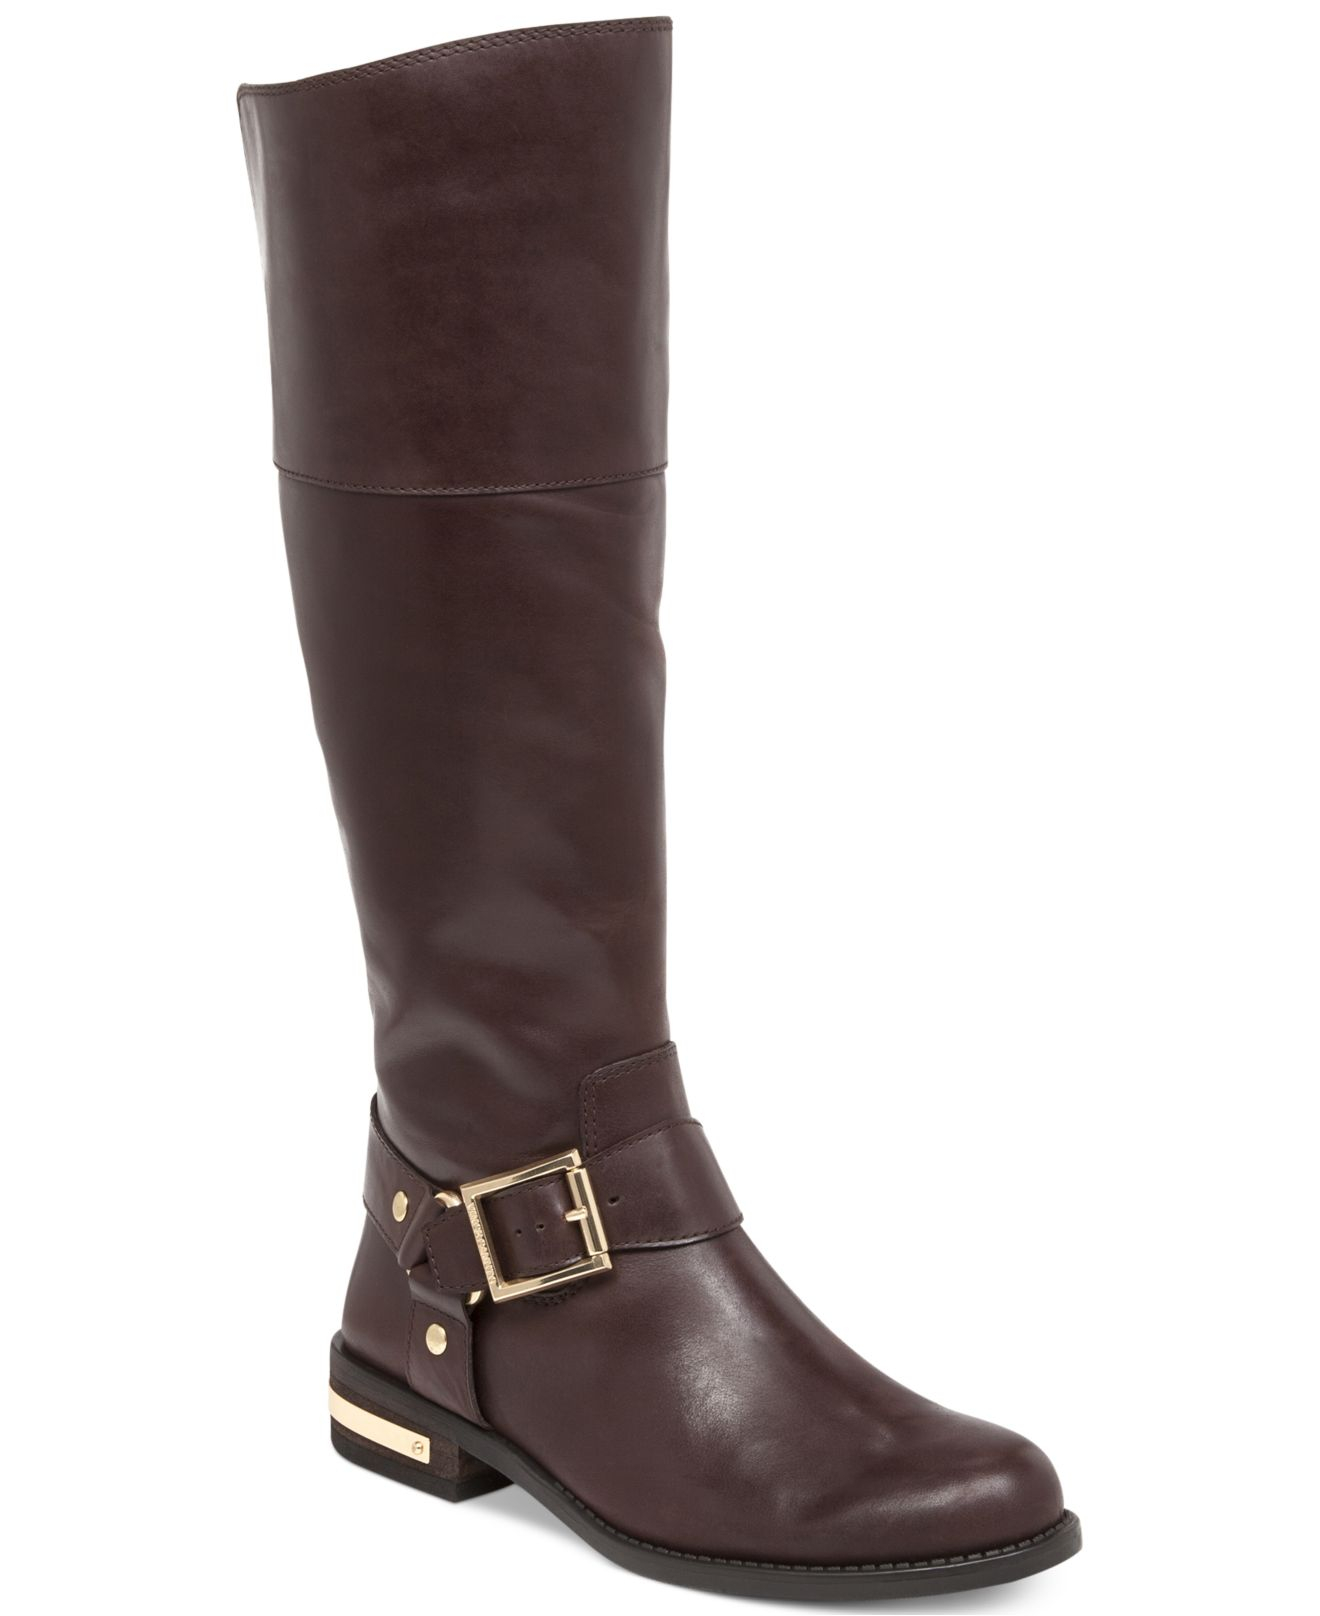 Vince camuto Kallie Tall Wide Calf Riding Boots in Brown | Lyst